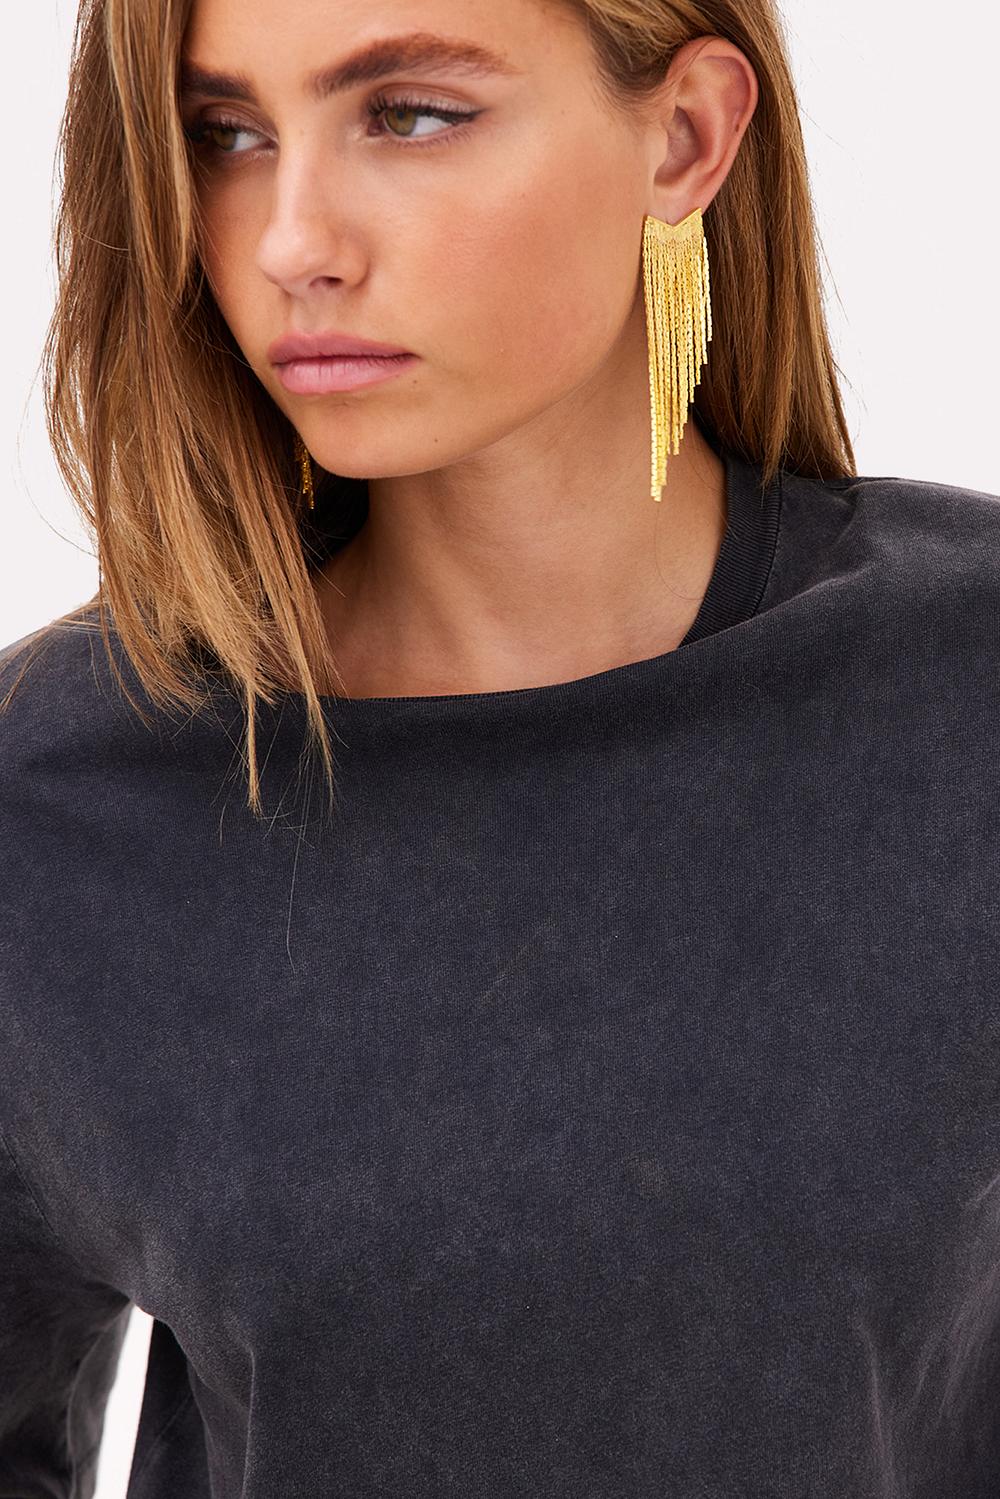 Golden earrings with fringes